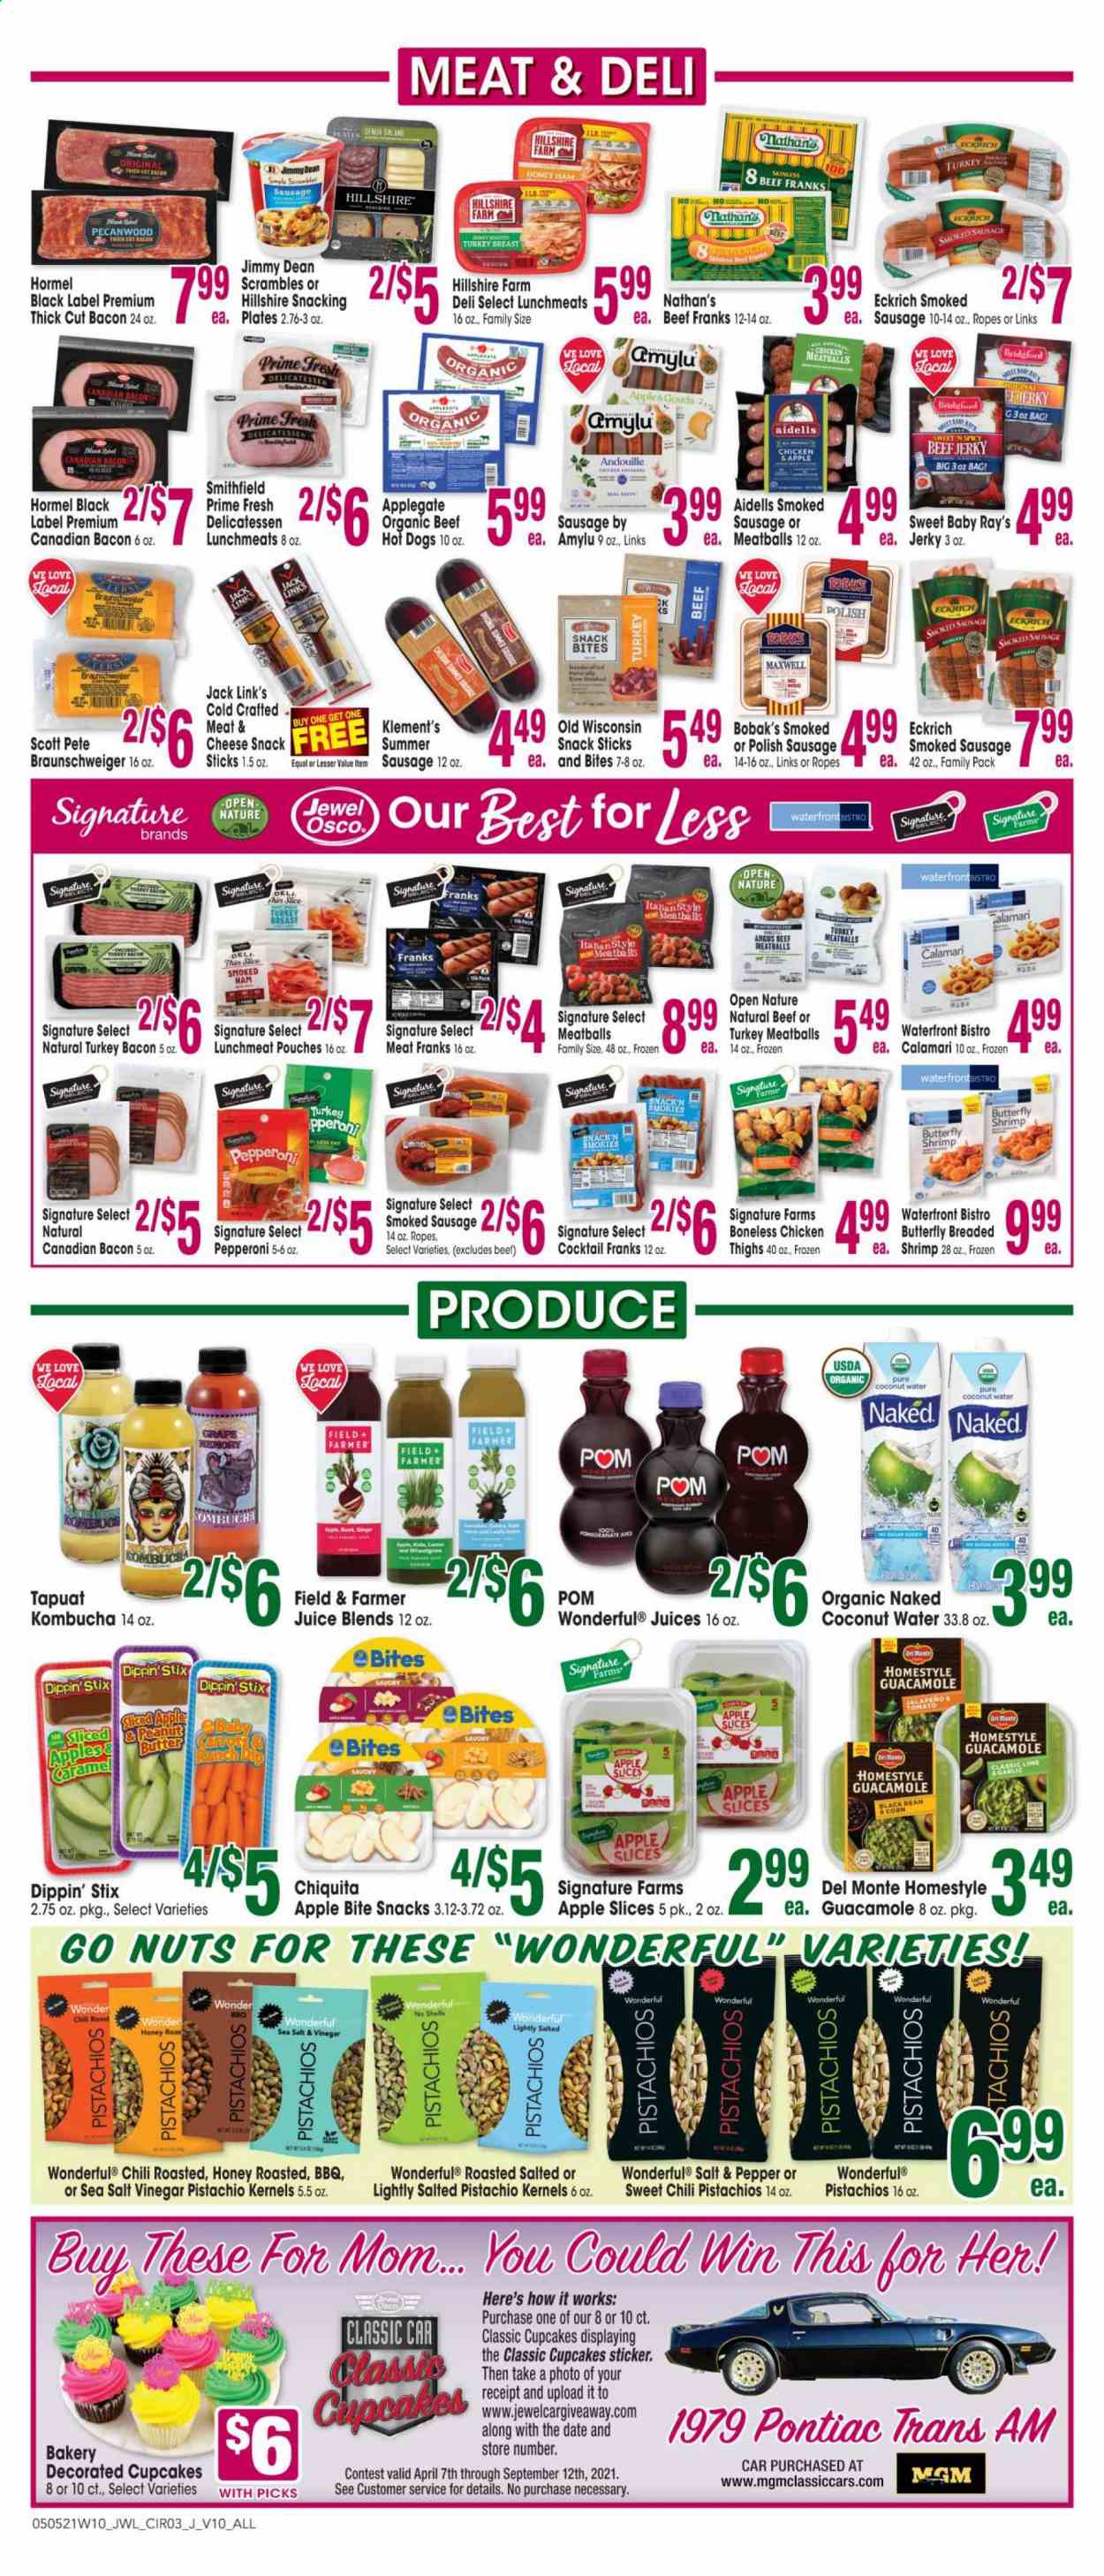 thumbnail - Jewel Osco Flyer - 05/05/2021 - 05/11/2021 - Sales products - cupcake, garlic, ginger, kale, calamari, shrimps, meatballs, Jimmy Dean, Hormel, bacon, beef jerky, canadian bacon, turkey bacon, ham, Hillshire Farm, jerky, sausage, smoked sausage, polish sausage, pepperoni, guacamole, lunch meat, gouda, butter, snack, Jack Link's, sugar, Ace, vinegar, pistachios, juice, coconut water, kombucha, chicken thighs, beef meat, plate, sticker. Page 3.